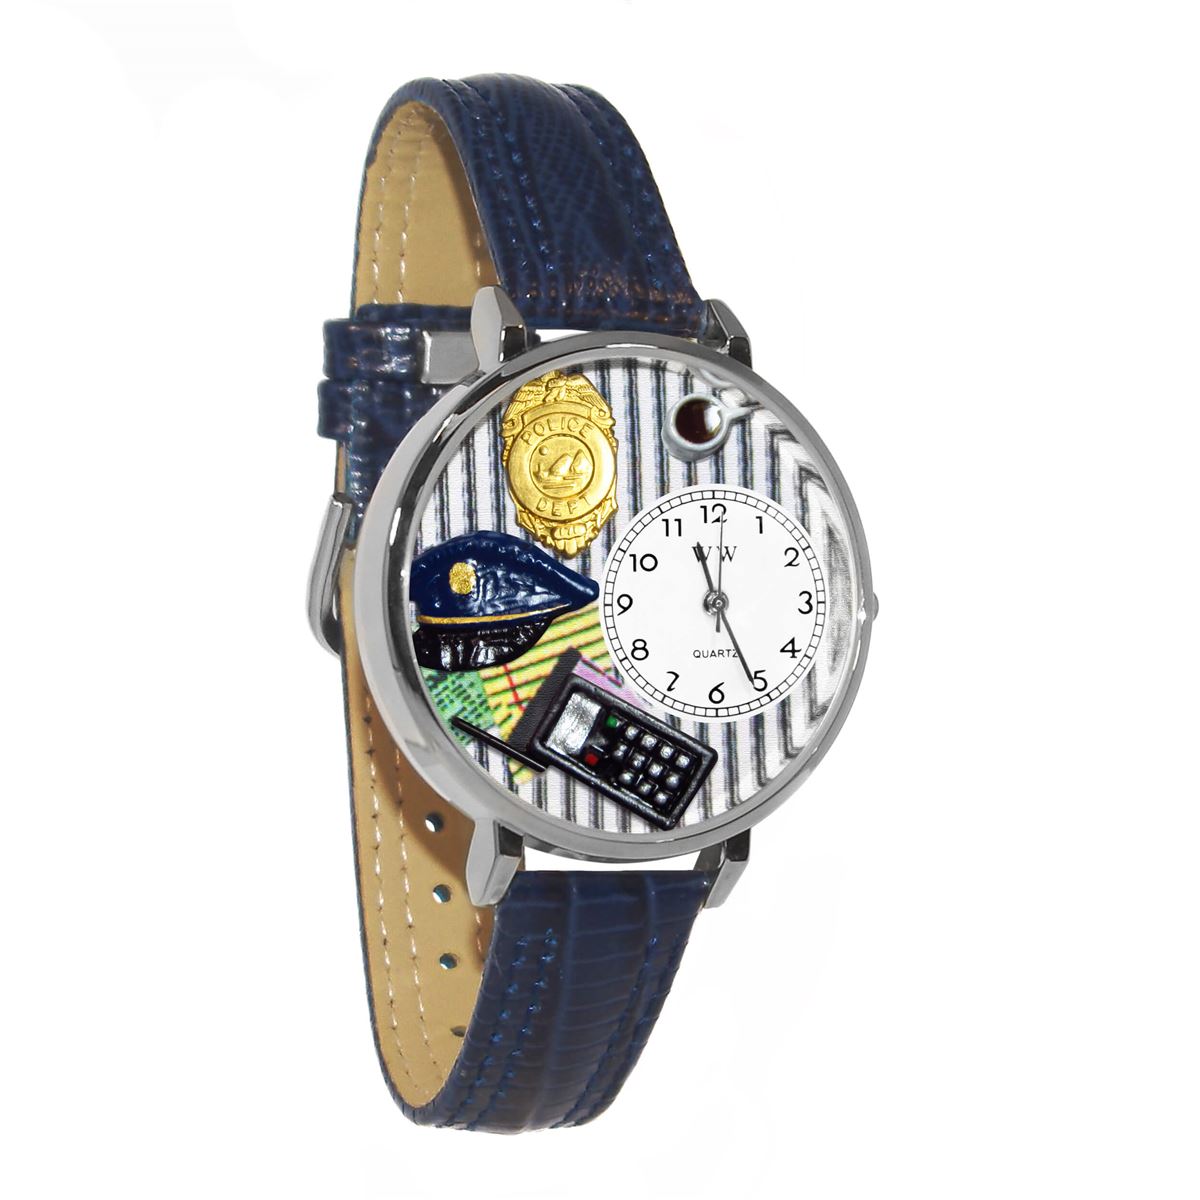 Whimsical Gifts | Policeman 3D Watch Large Style | Handmade in USA | Professions Themed | First Responders | Novelty Unique Fun Miniatures Gift | Silver Finish Navy Blue Leather Watch Band